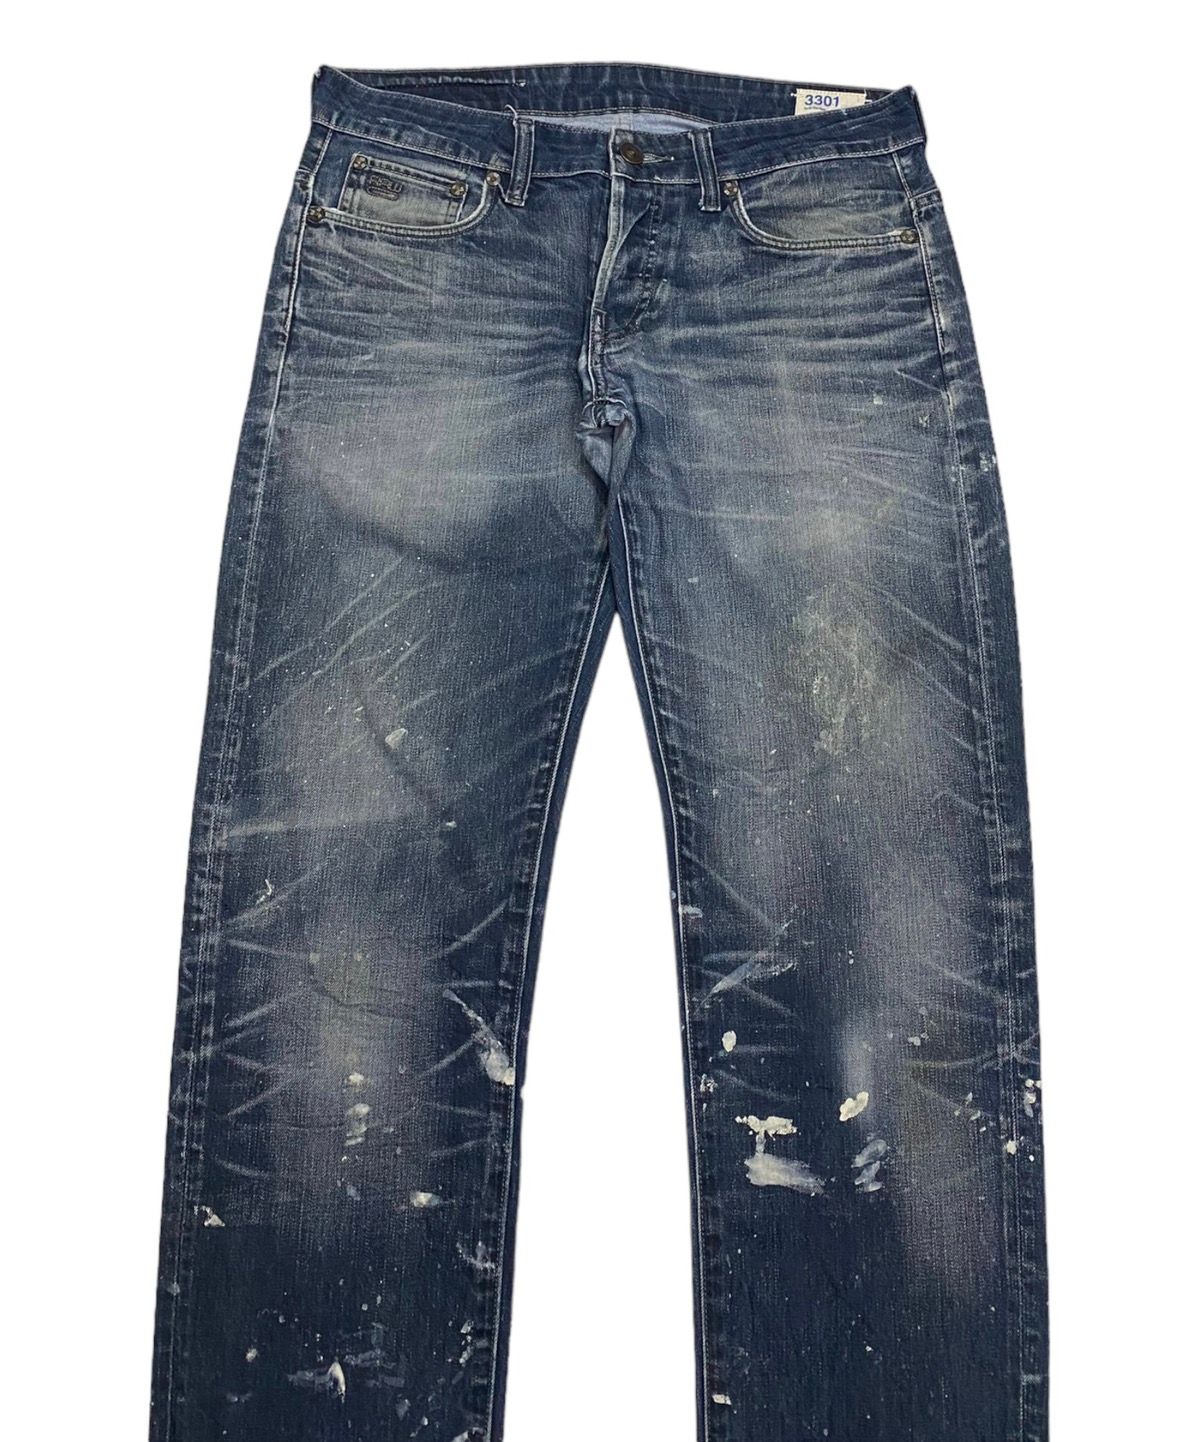 Archival Clothing - G-STAR RAW DISTRESSED PAINTED 3301 UNDERCOVER STYLE JEANS - 3